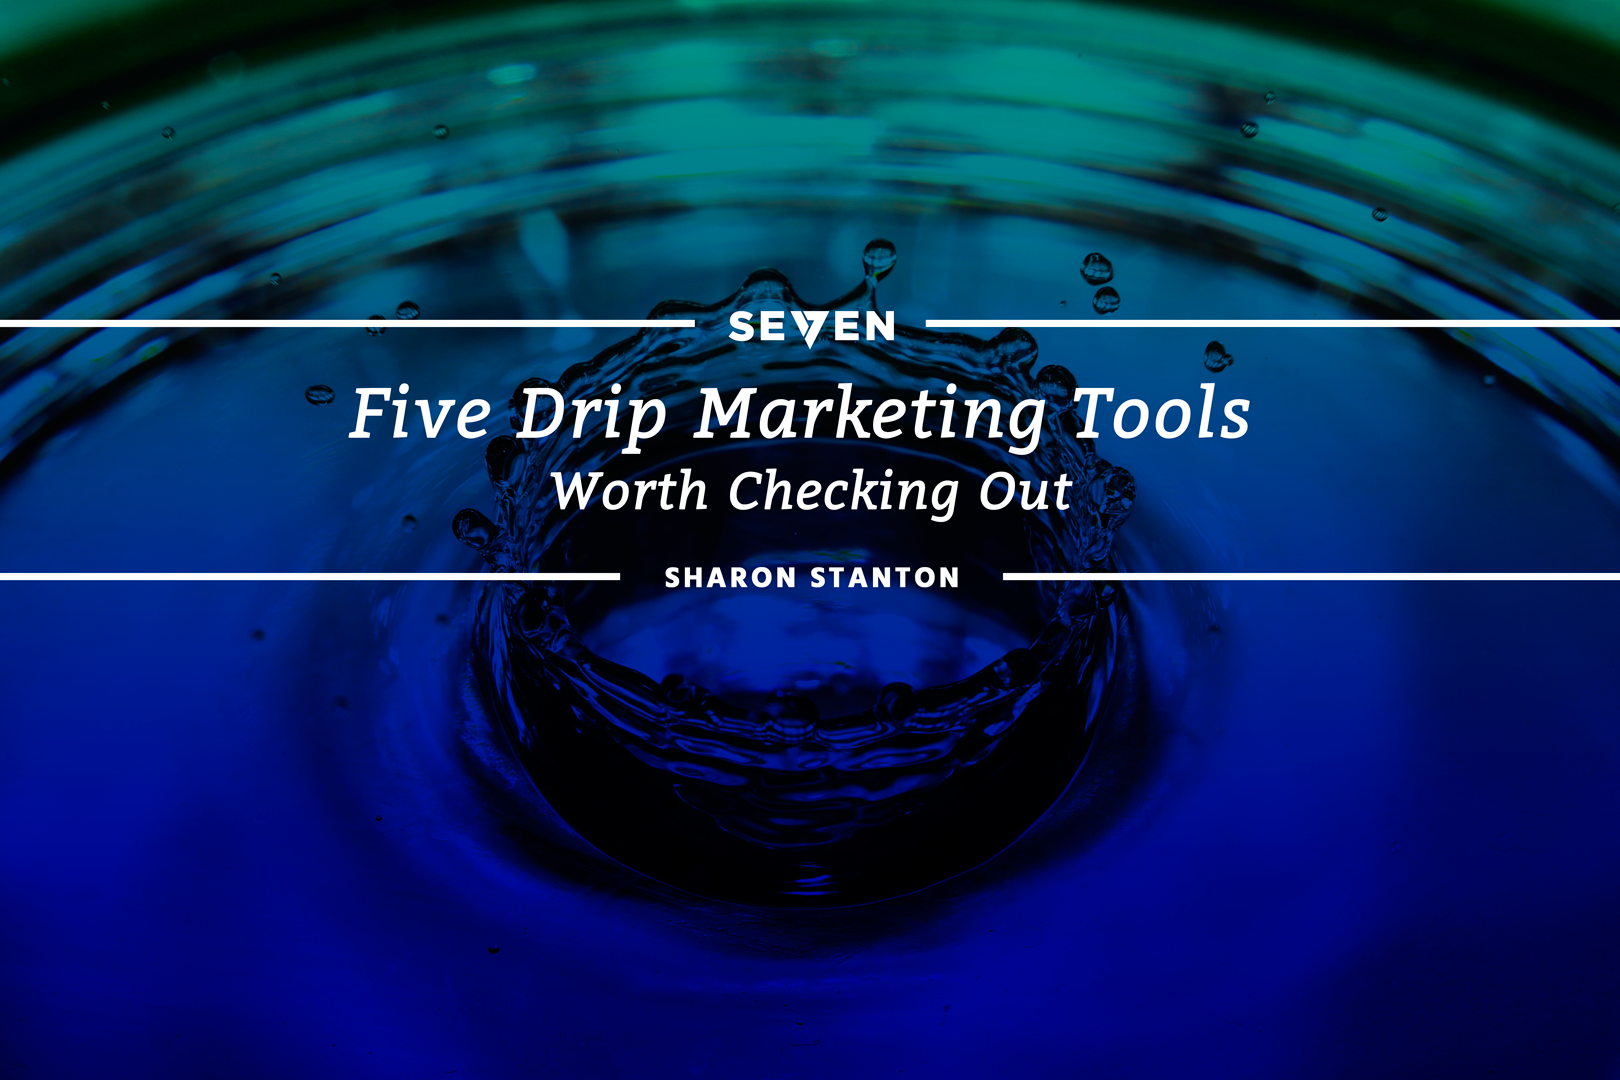 Five Drip Marketing Tools Worth Checking Out